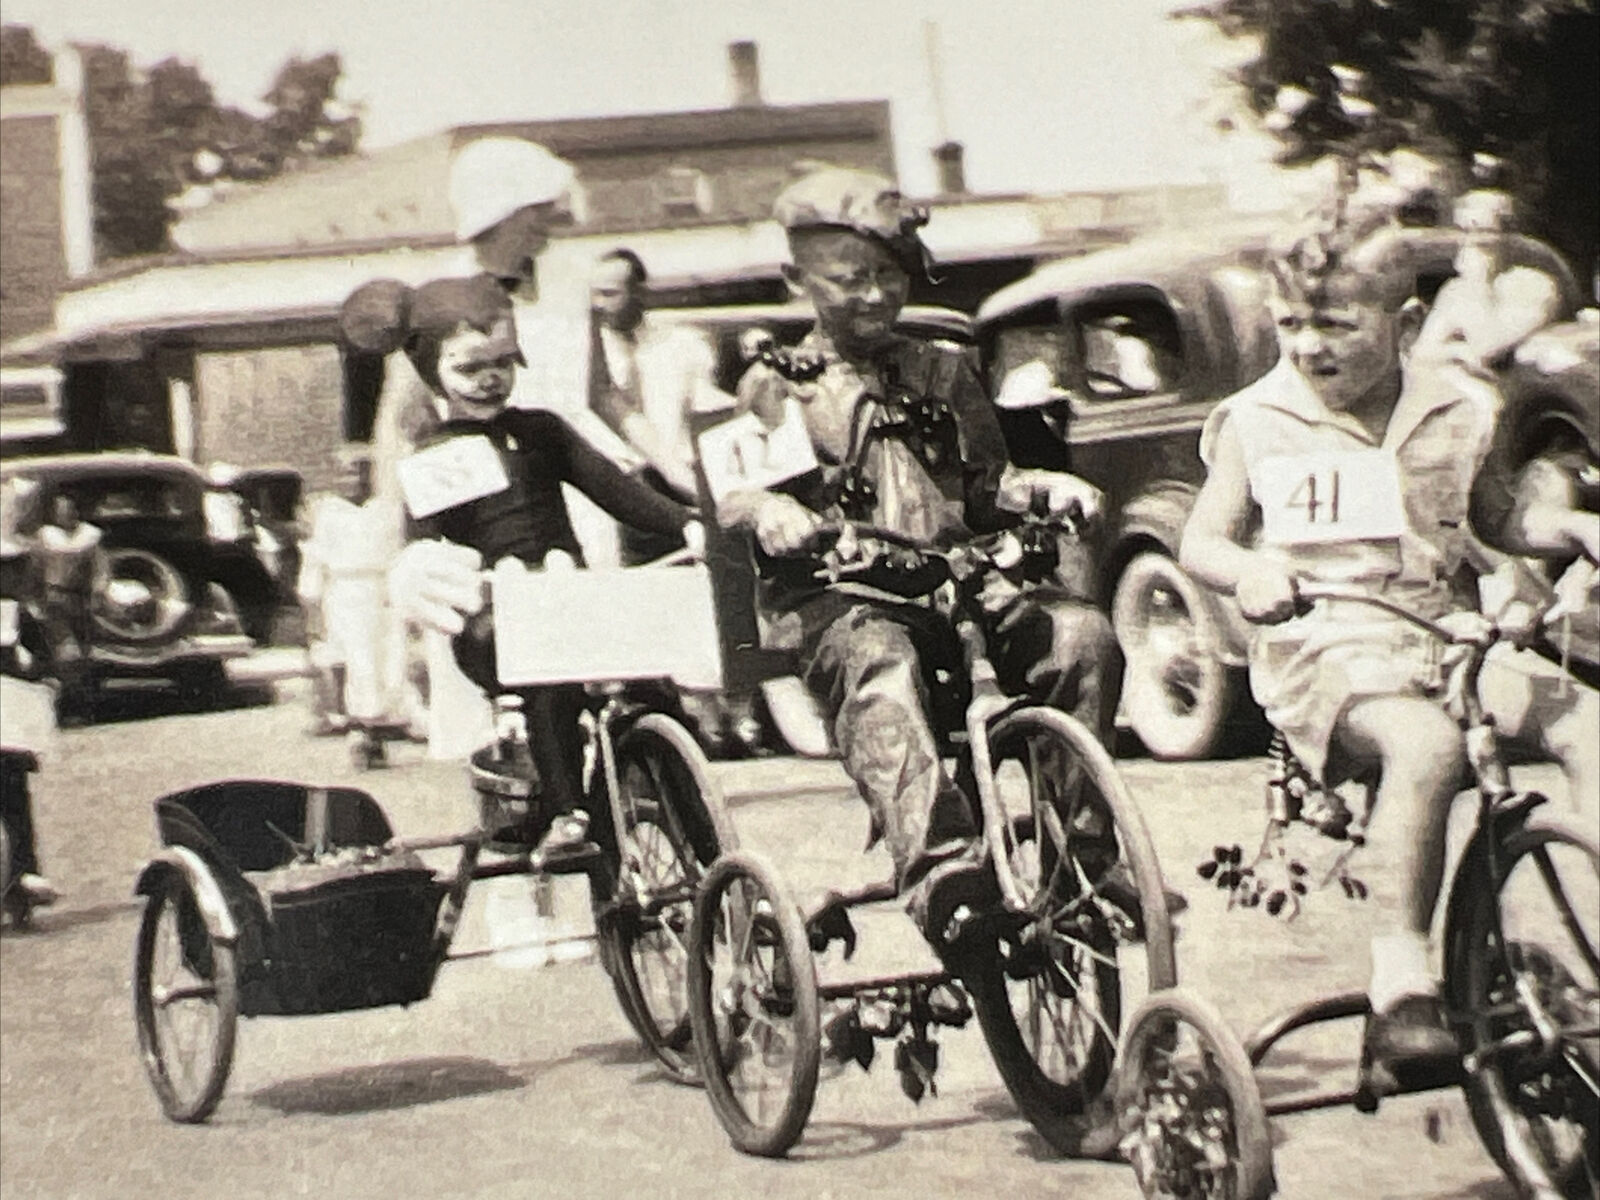 1930s TRAVERSE CITY MICHIGAN Cherry Festival Parade Kids in Costume TRICYCLES